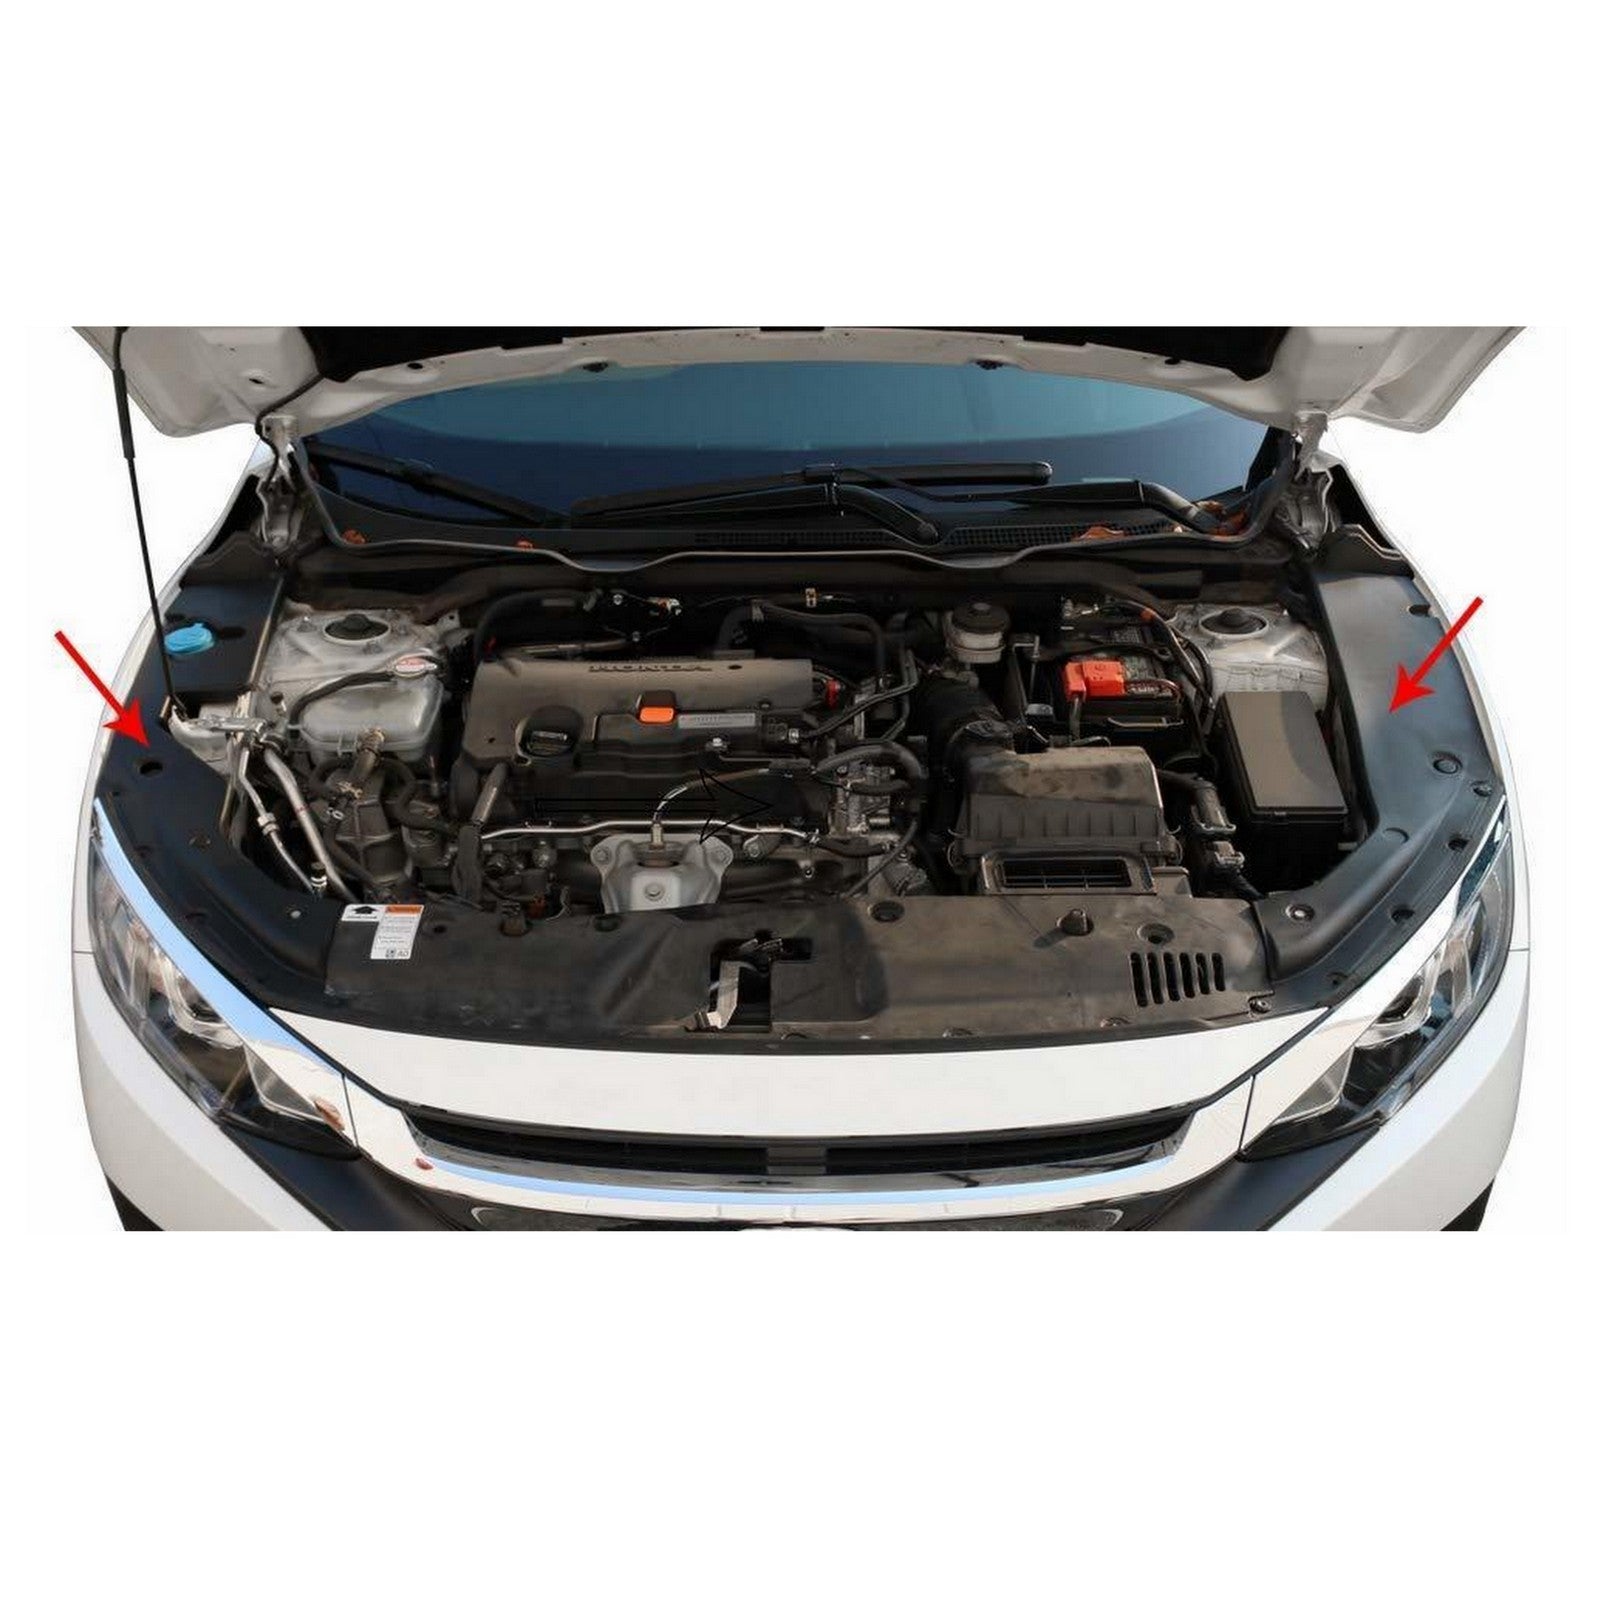 ENGINE SIDE SHIELD COVER FOR HONDA CIVIC (2016-2021)